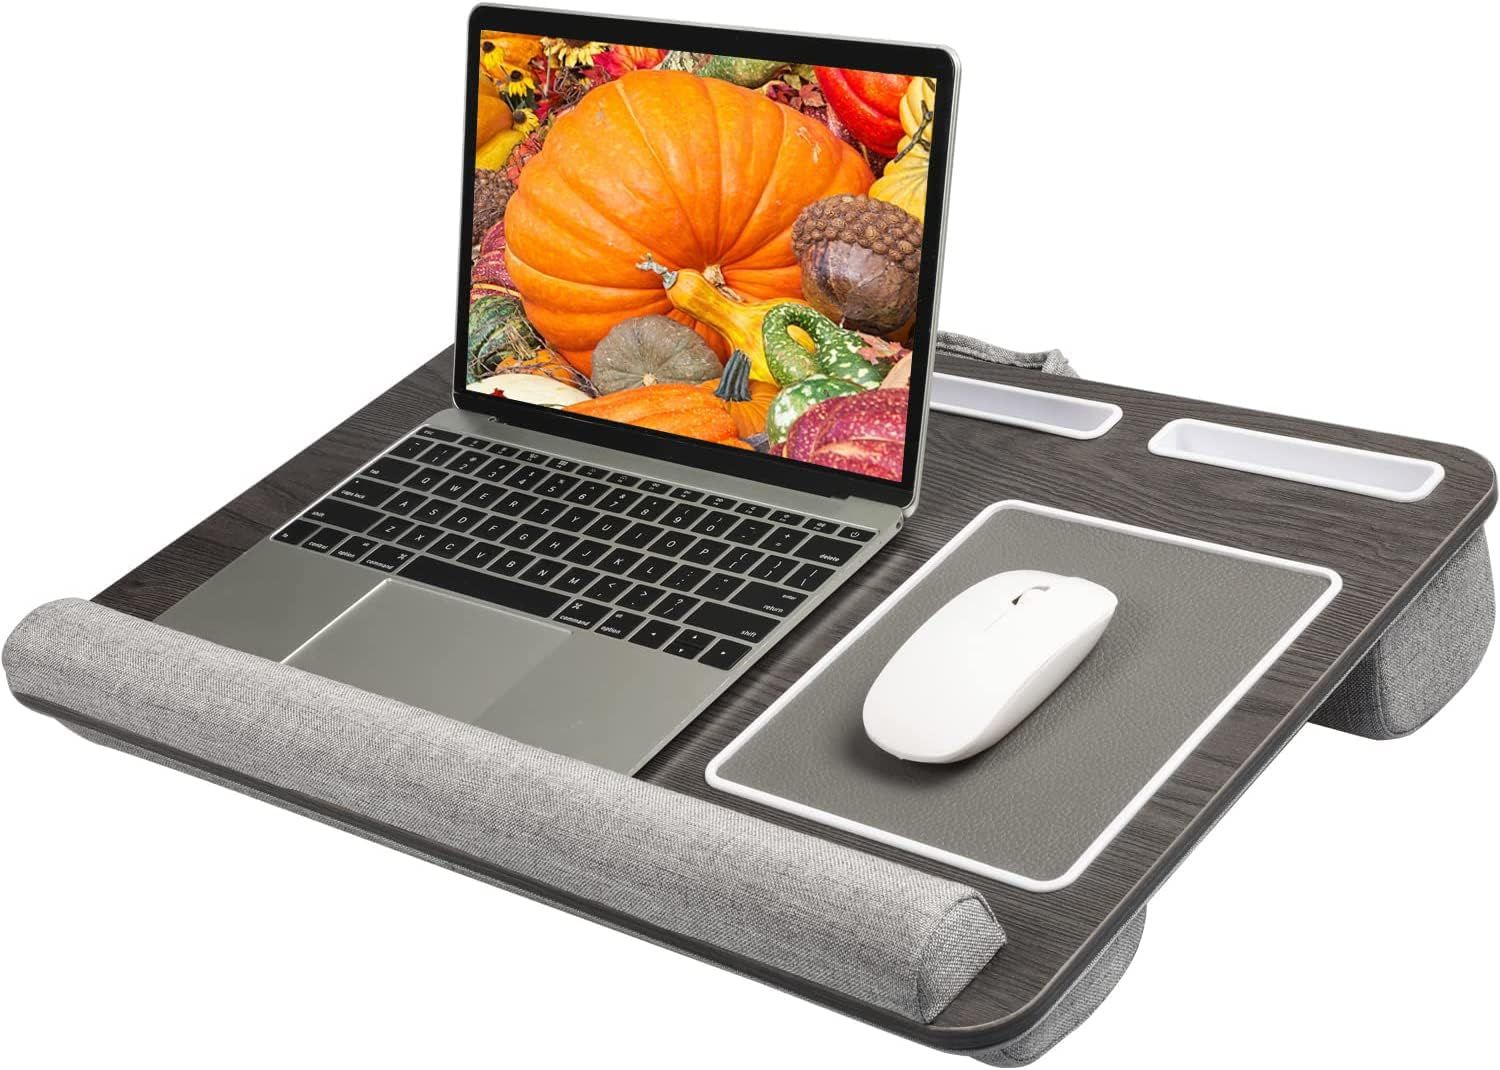 HUANUO Lap Desk - Fits up to 17 inches Laptop Desk, Built in Wrist Pad for Notebook, MacBook, Tab... | Amazon (US)